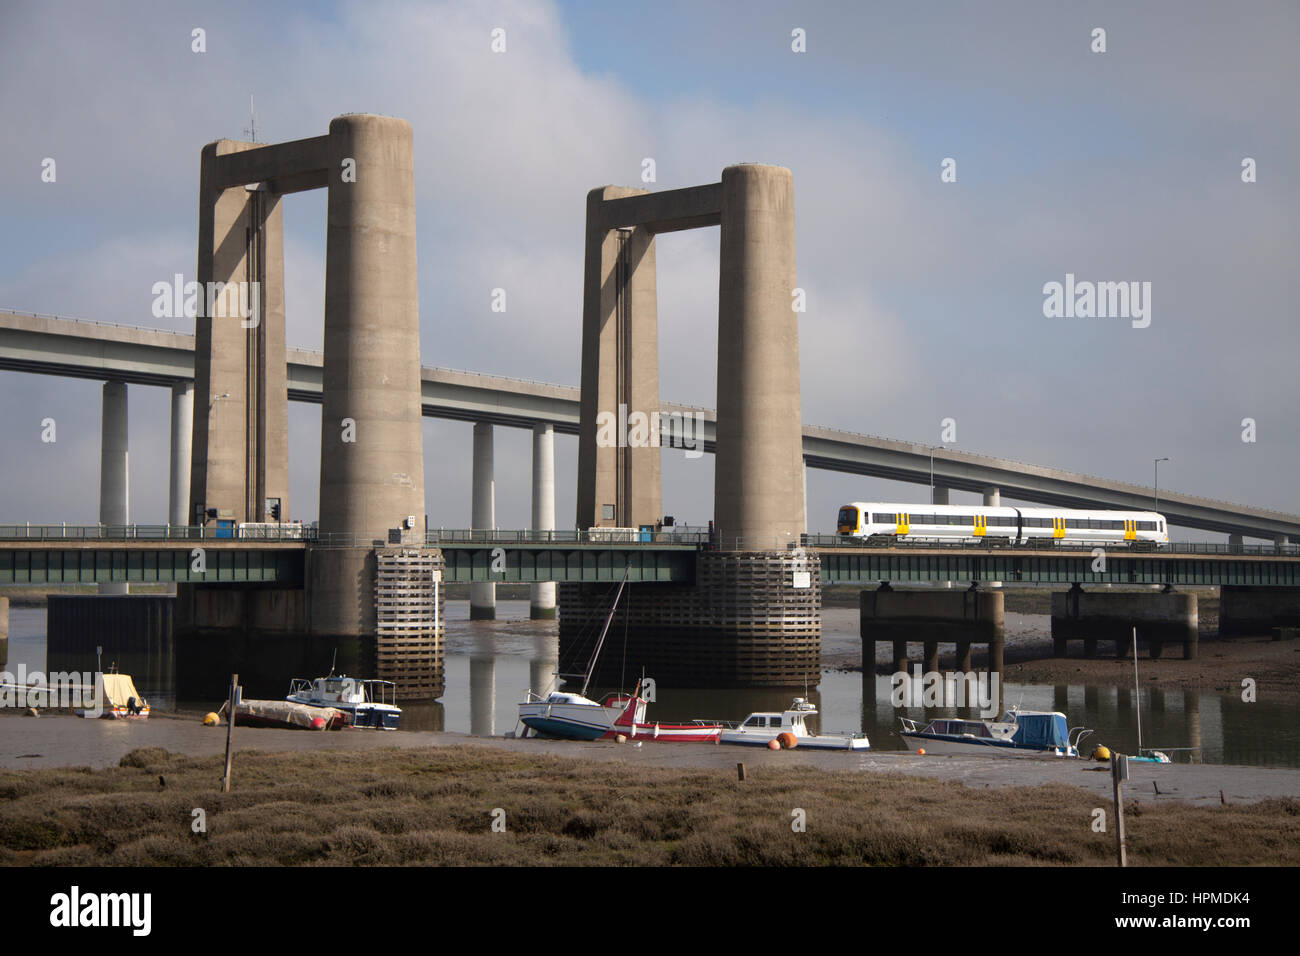 A train crossing the Kingsferry Bridge which is a combined road and railway vertical-lift bridge connecting the Isle of Sheppey with mainline Kent. Stock Photo